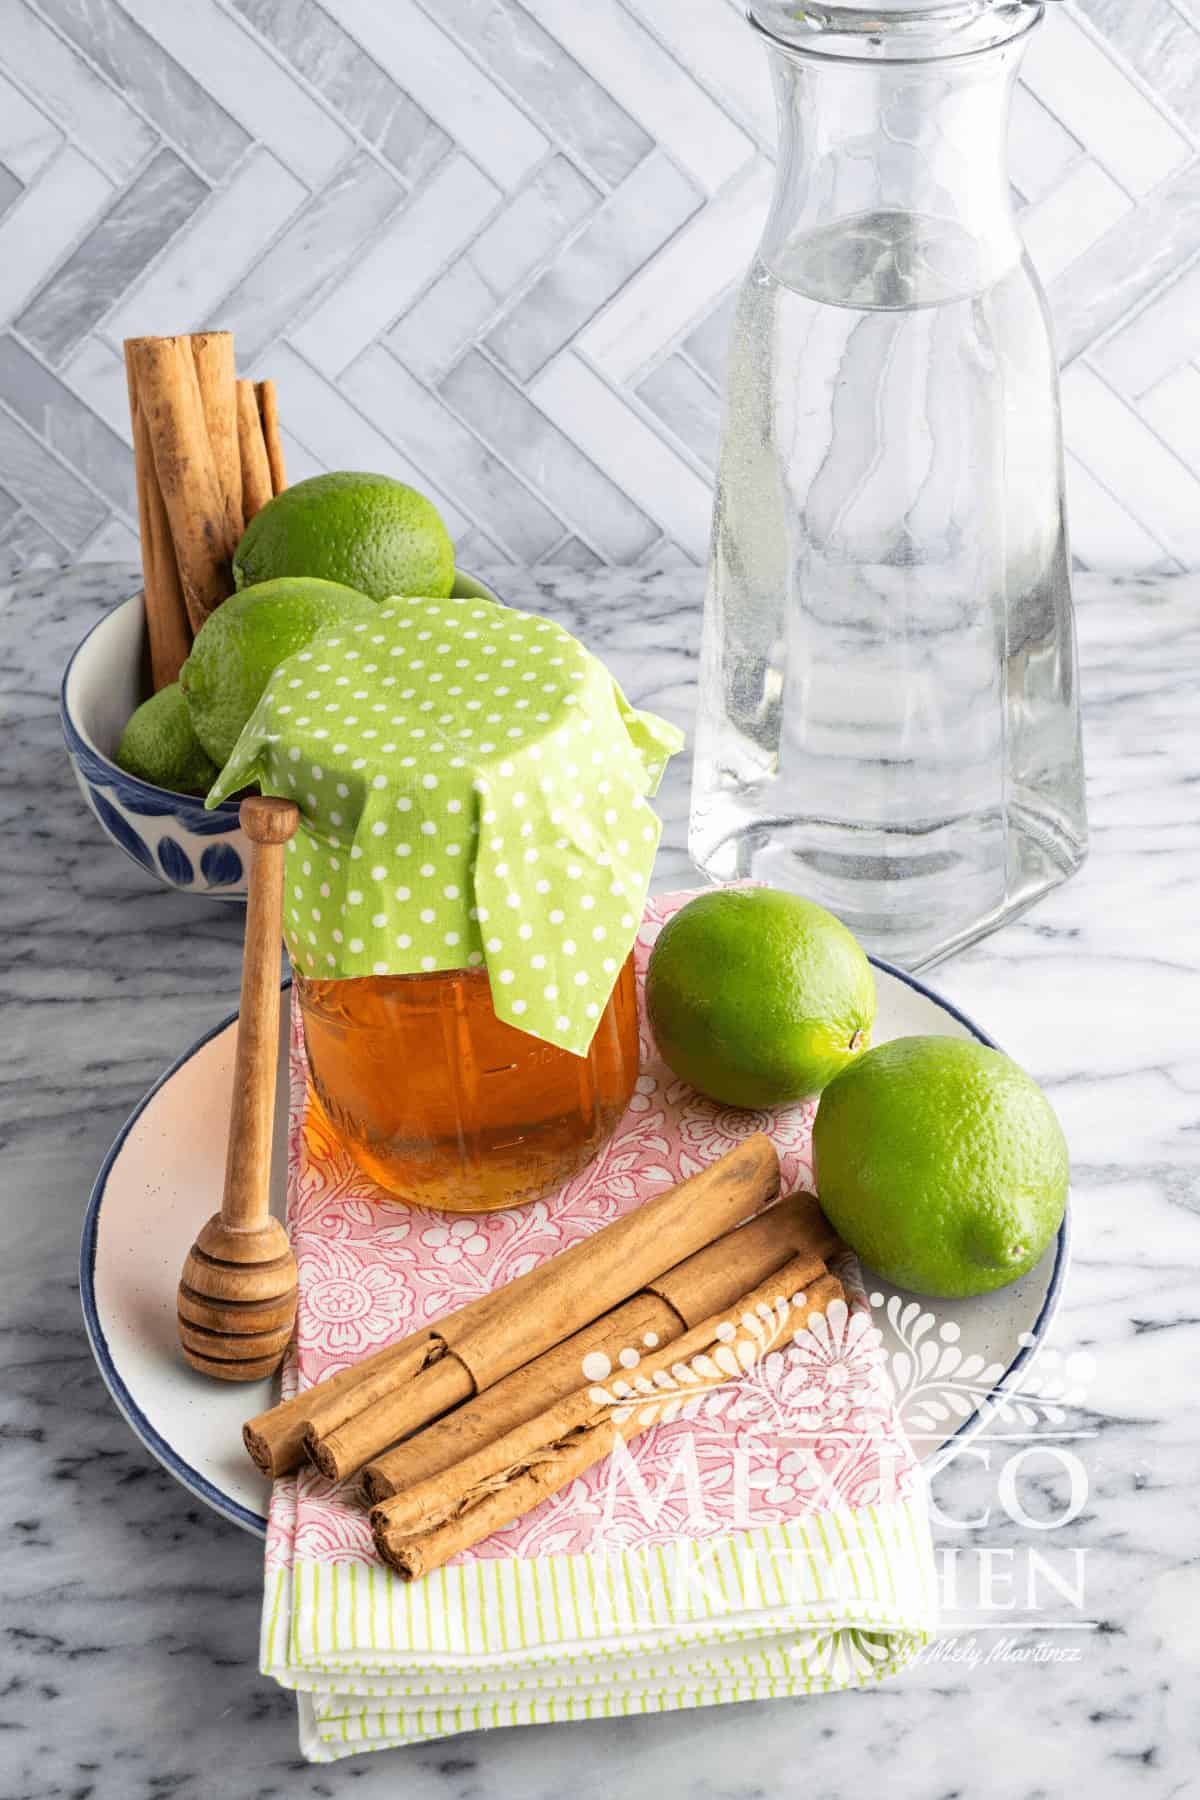 Mexican cinnamon, honey, limes and water.